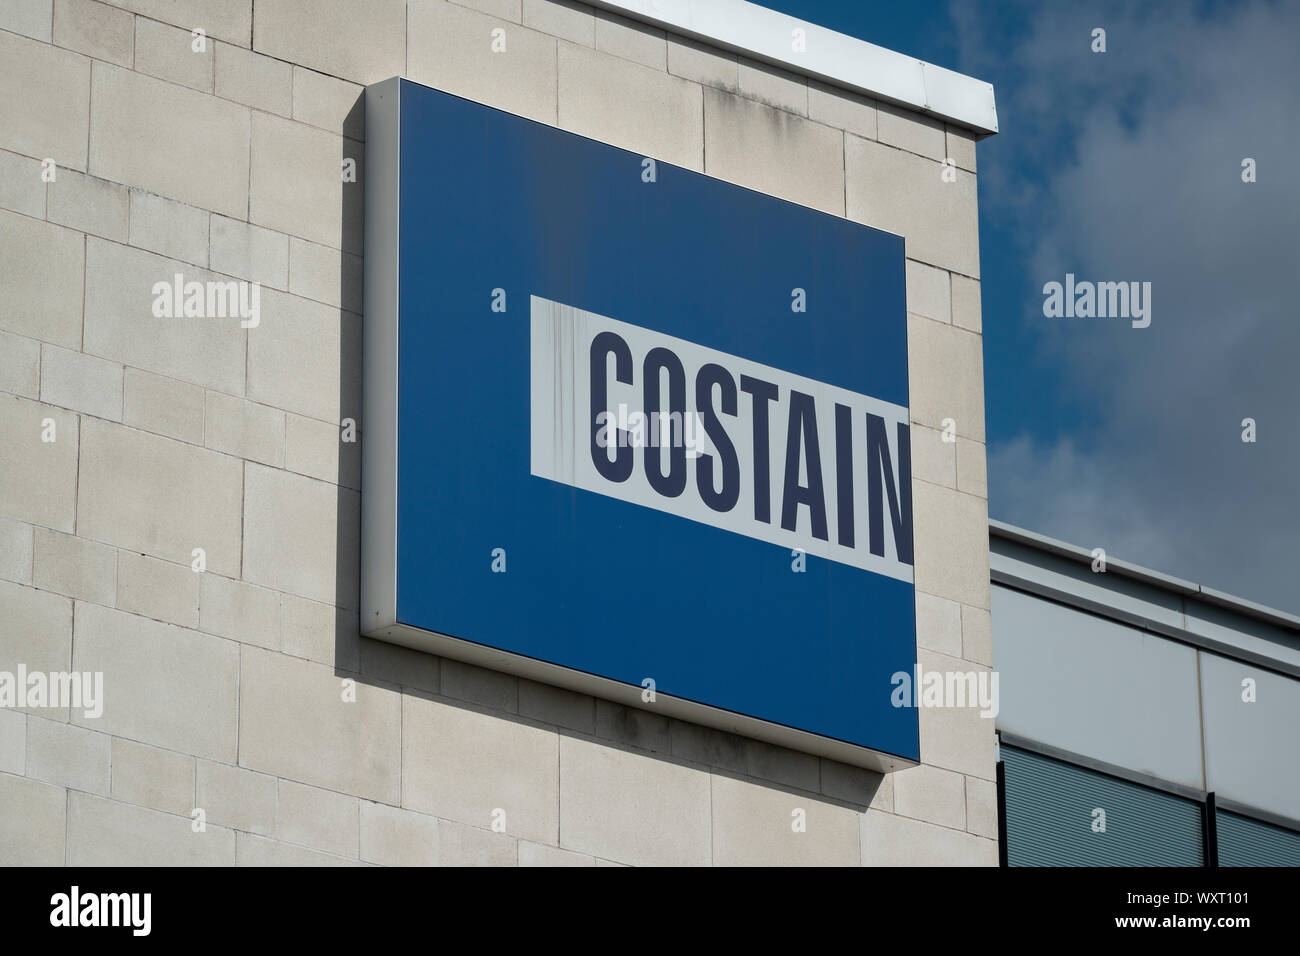 Signage outside the offices of Costain engineering consultants in Manchester Business Park, Costain House, Aviator Way, Wythenshawe, Manchester, UK Stock Photo